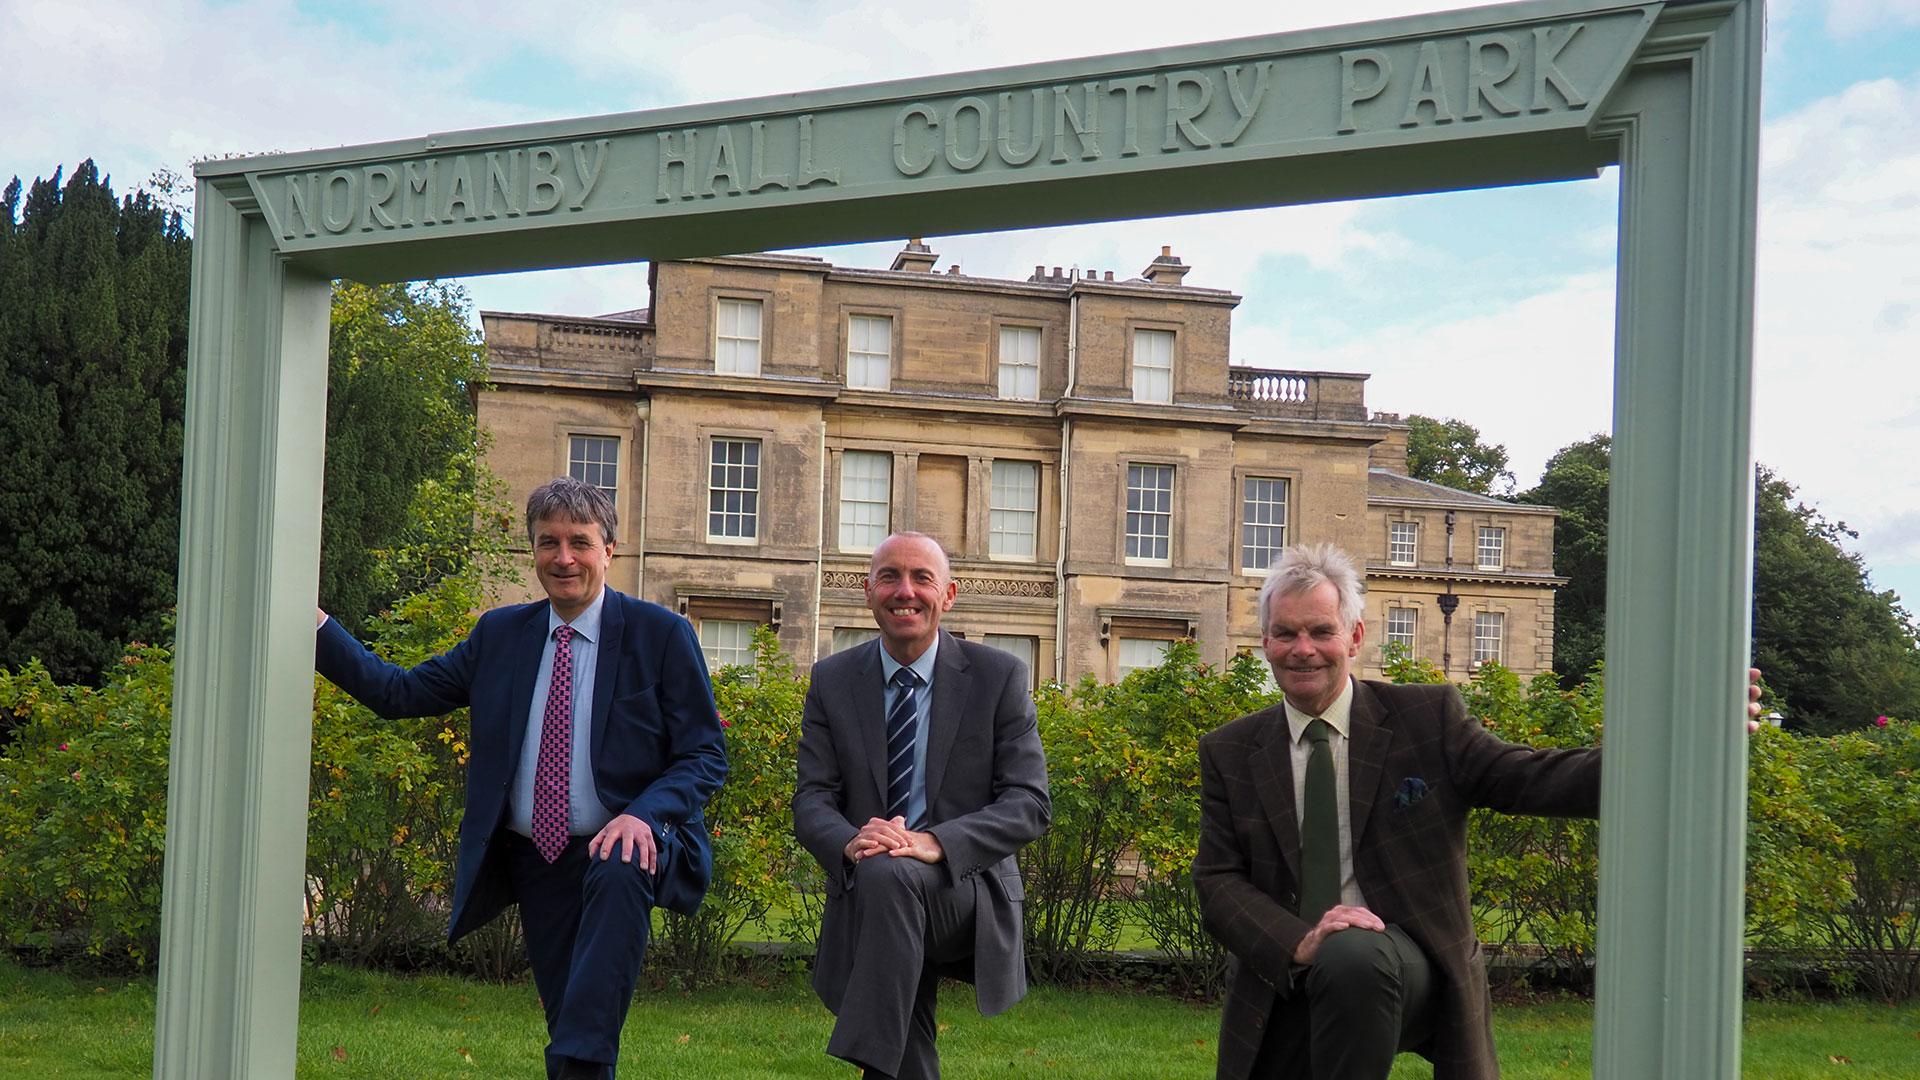 Three leaders at Normanby Hall